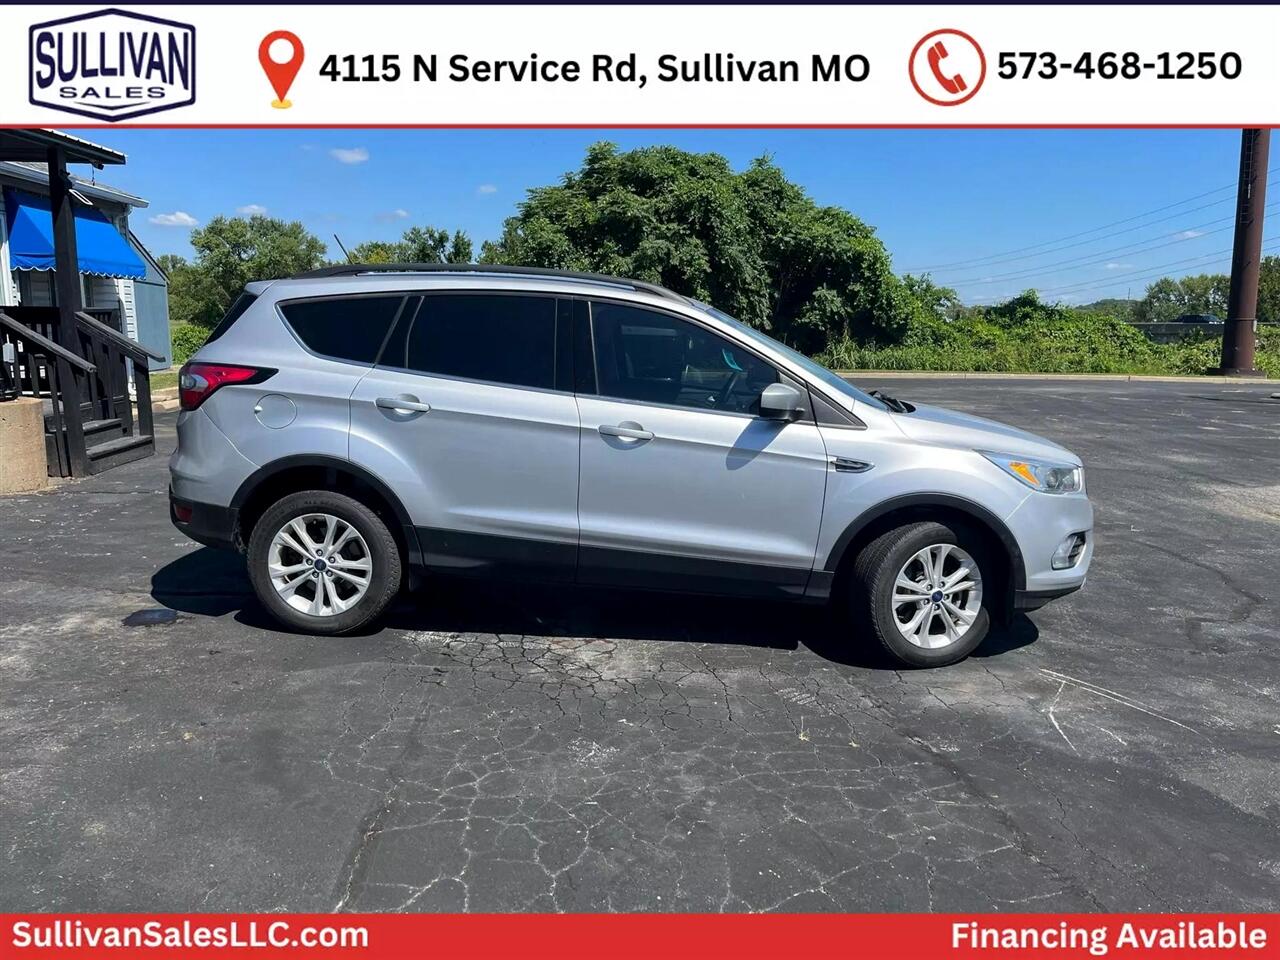 Used 2018 Ford Escape SE with VIN 1FMCU9GD9JUB29391 for sale in Sullivan, MO